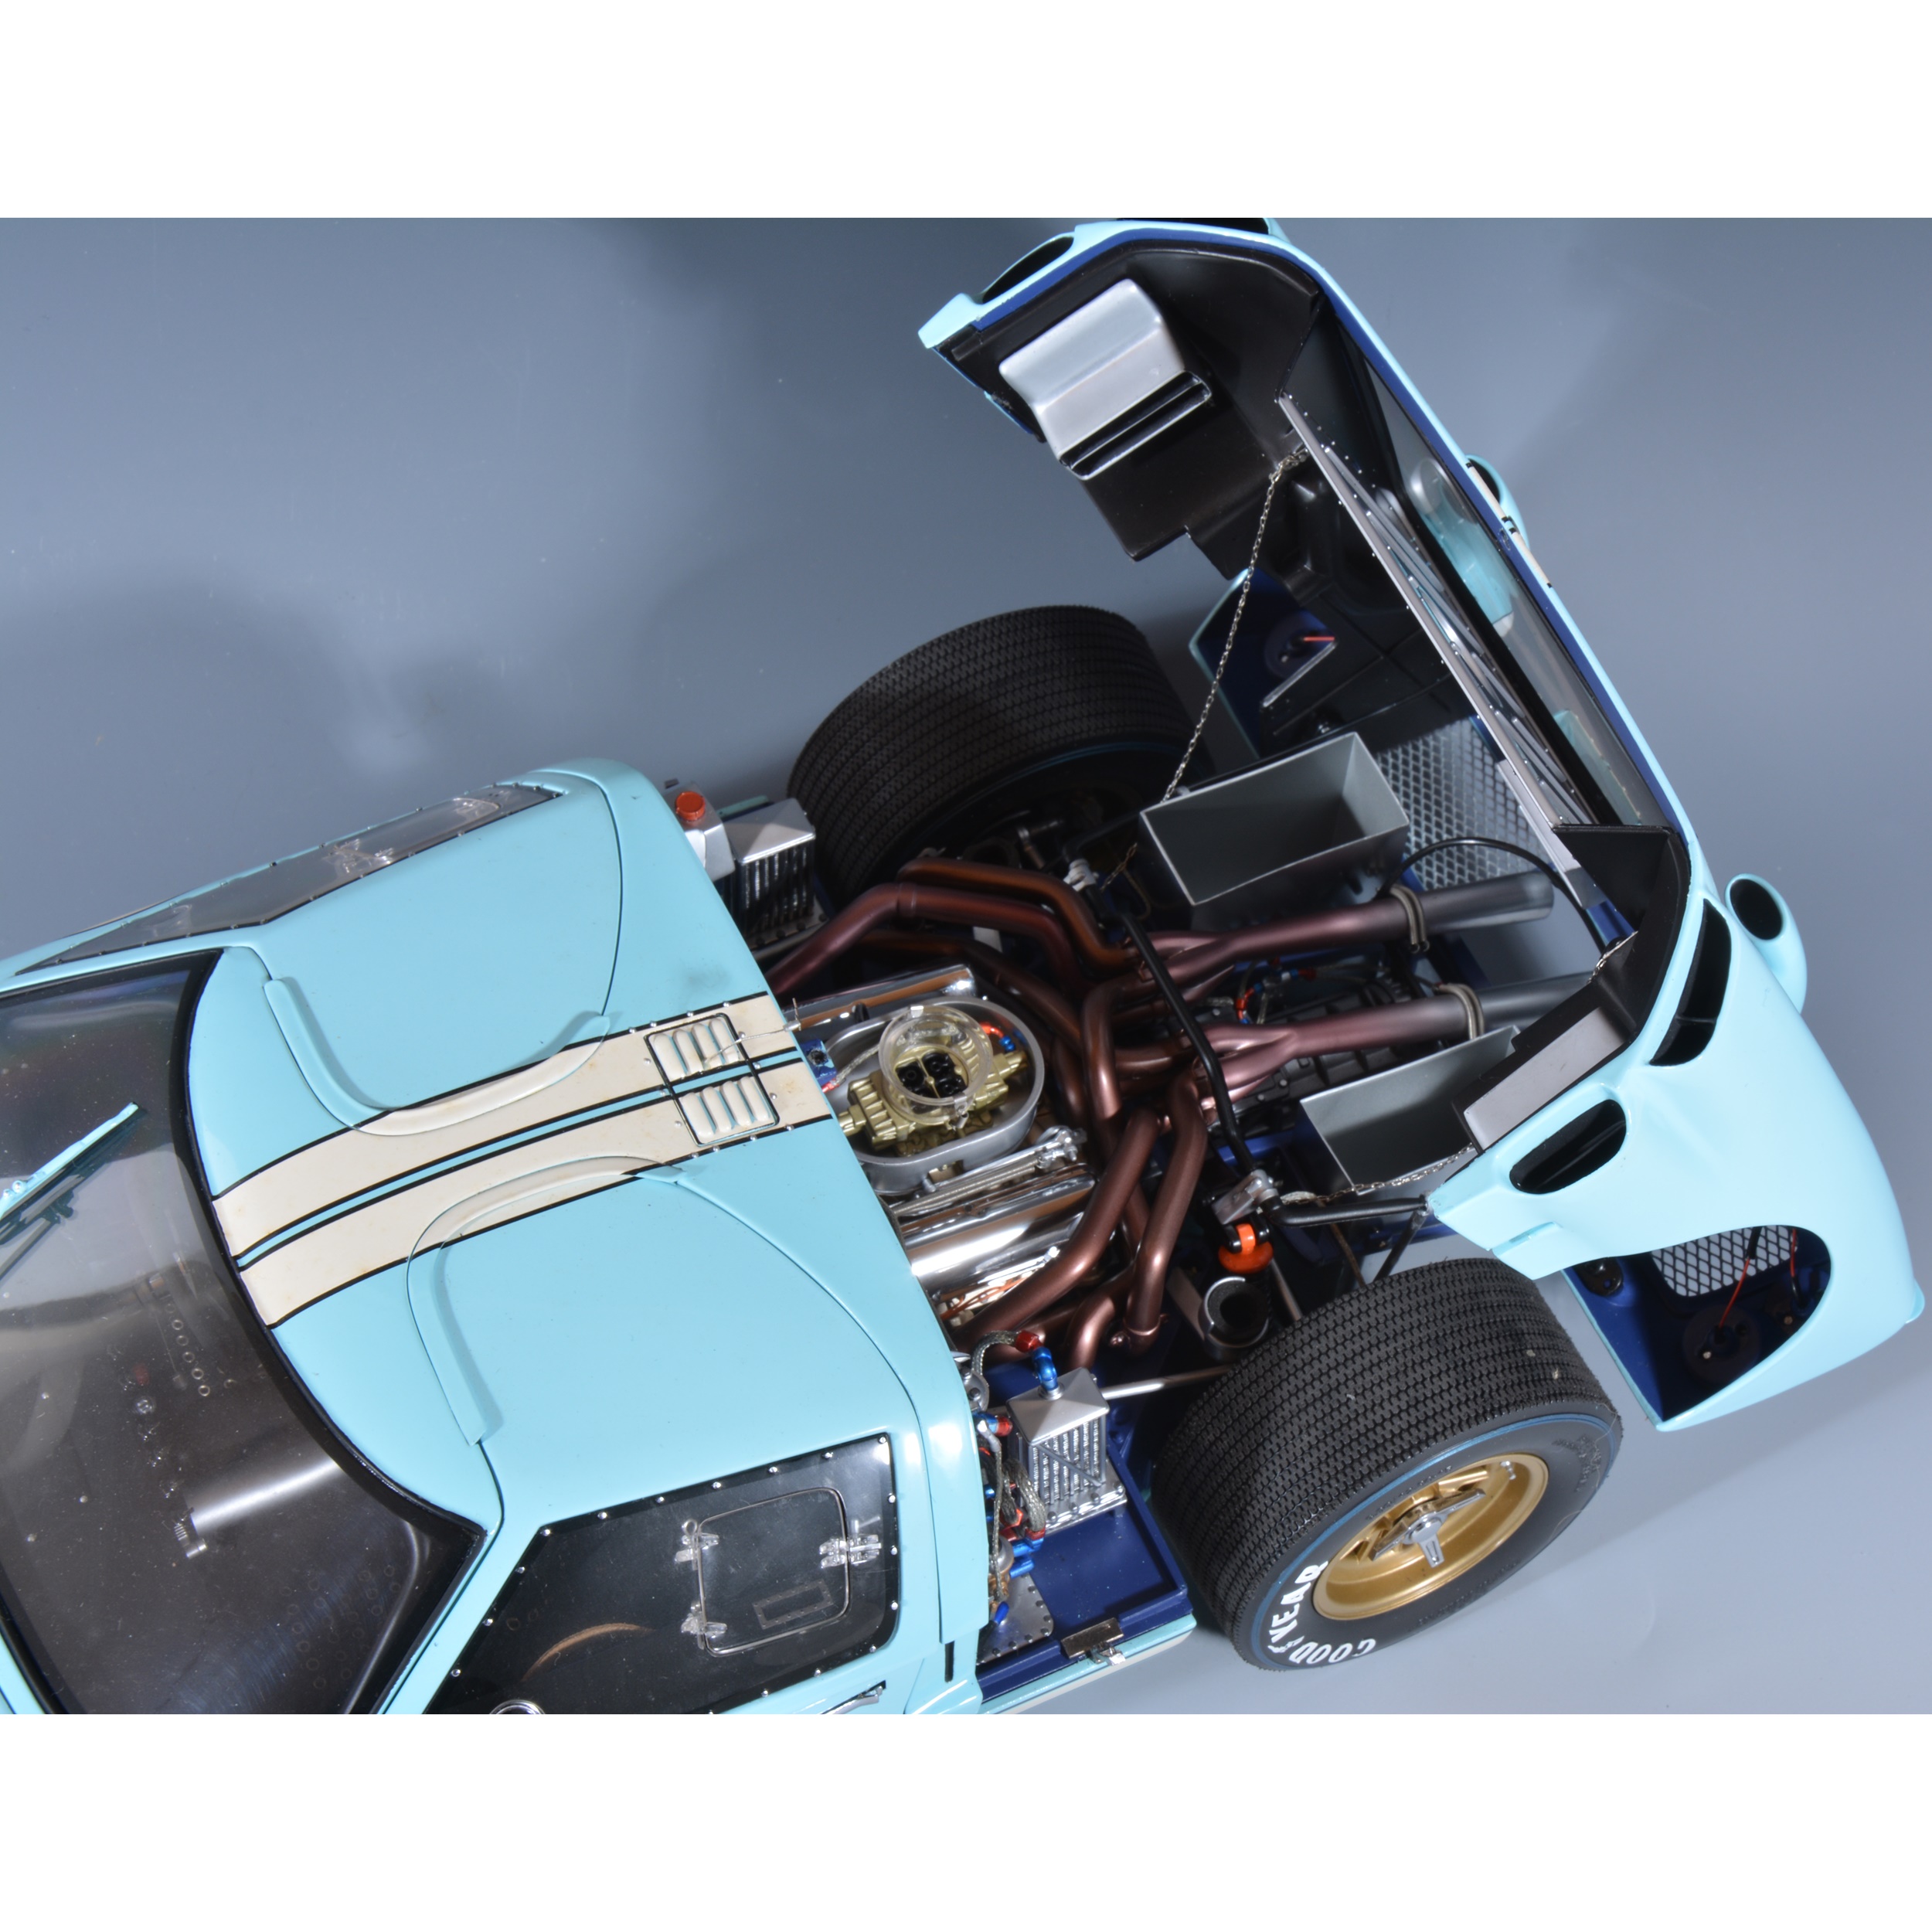 Lot 76 - Exoto 1:10 scale model: Ford GT40 MkII (1966)